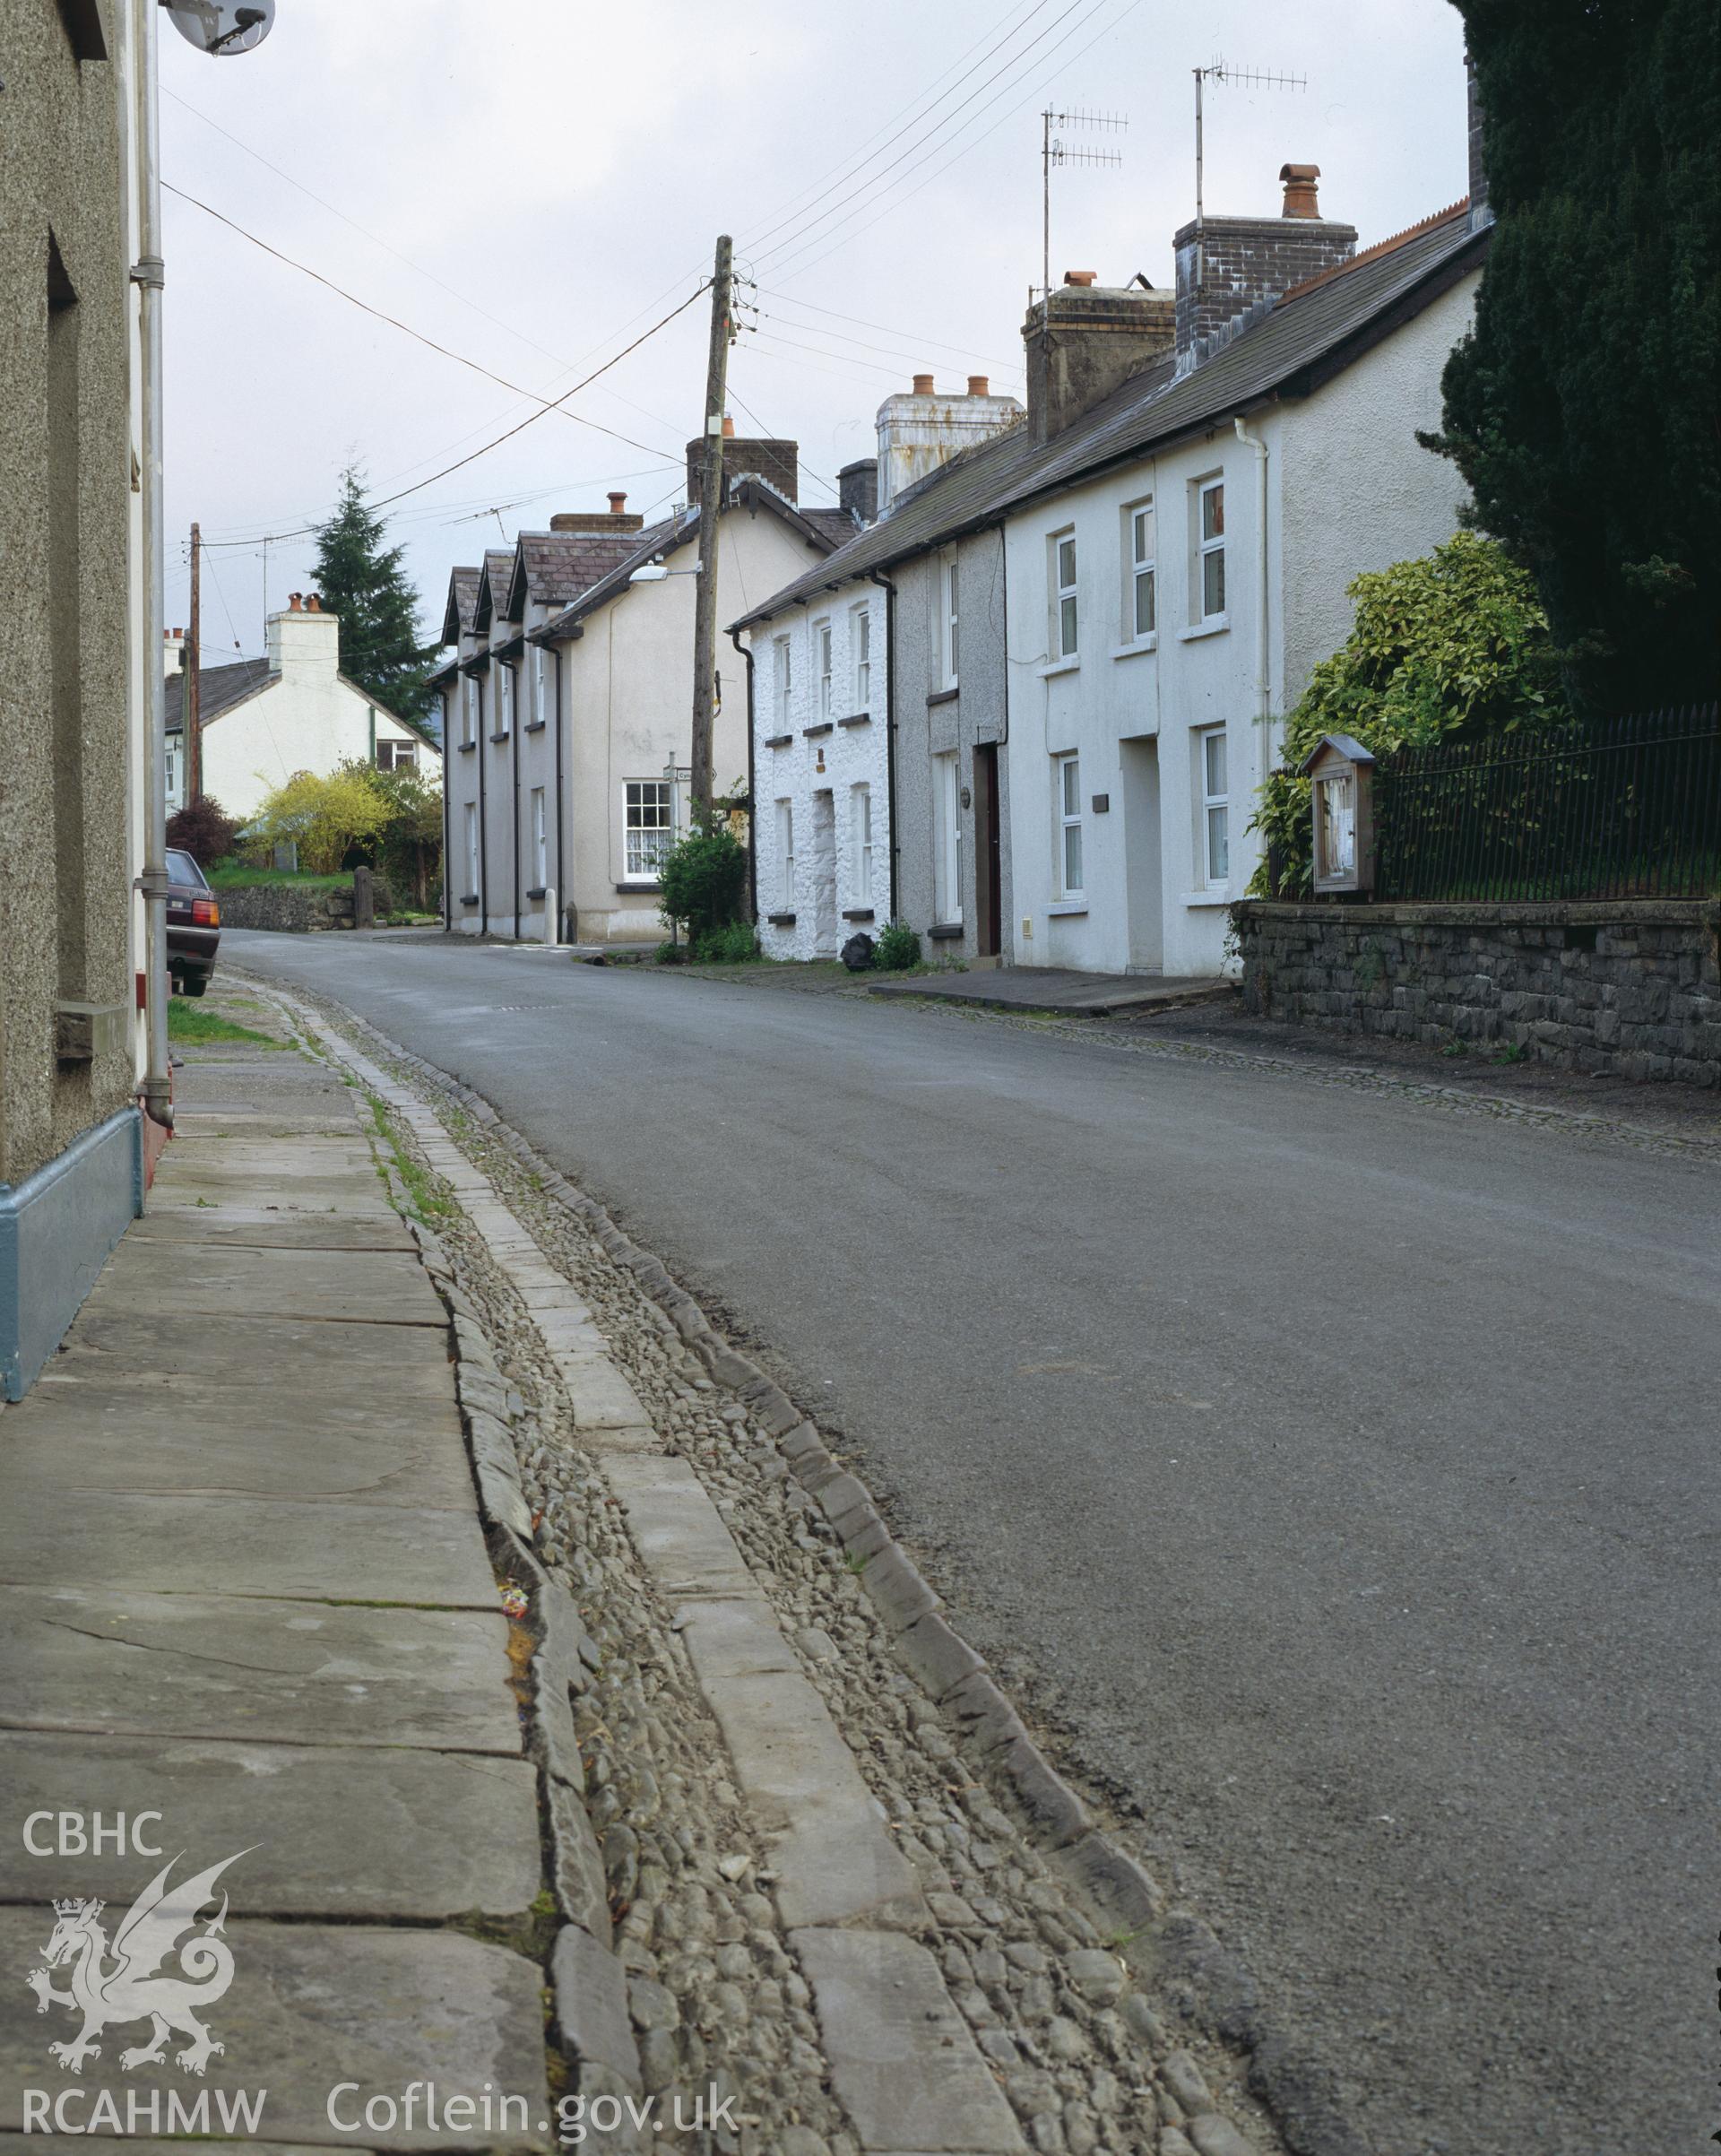 Colour transparency showing street scene in Cilycwm, produced by Iain Wright, June 2004.